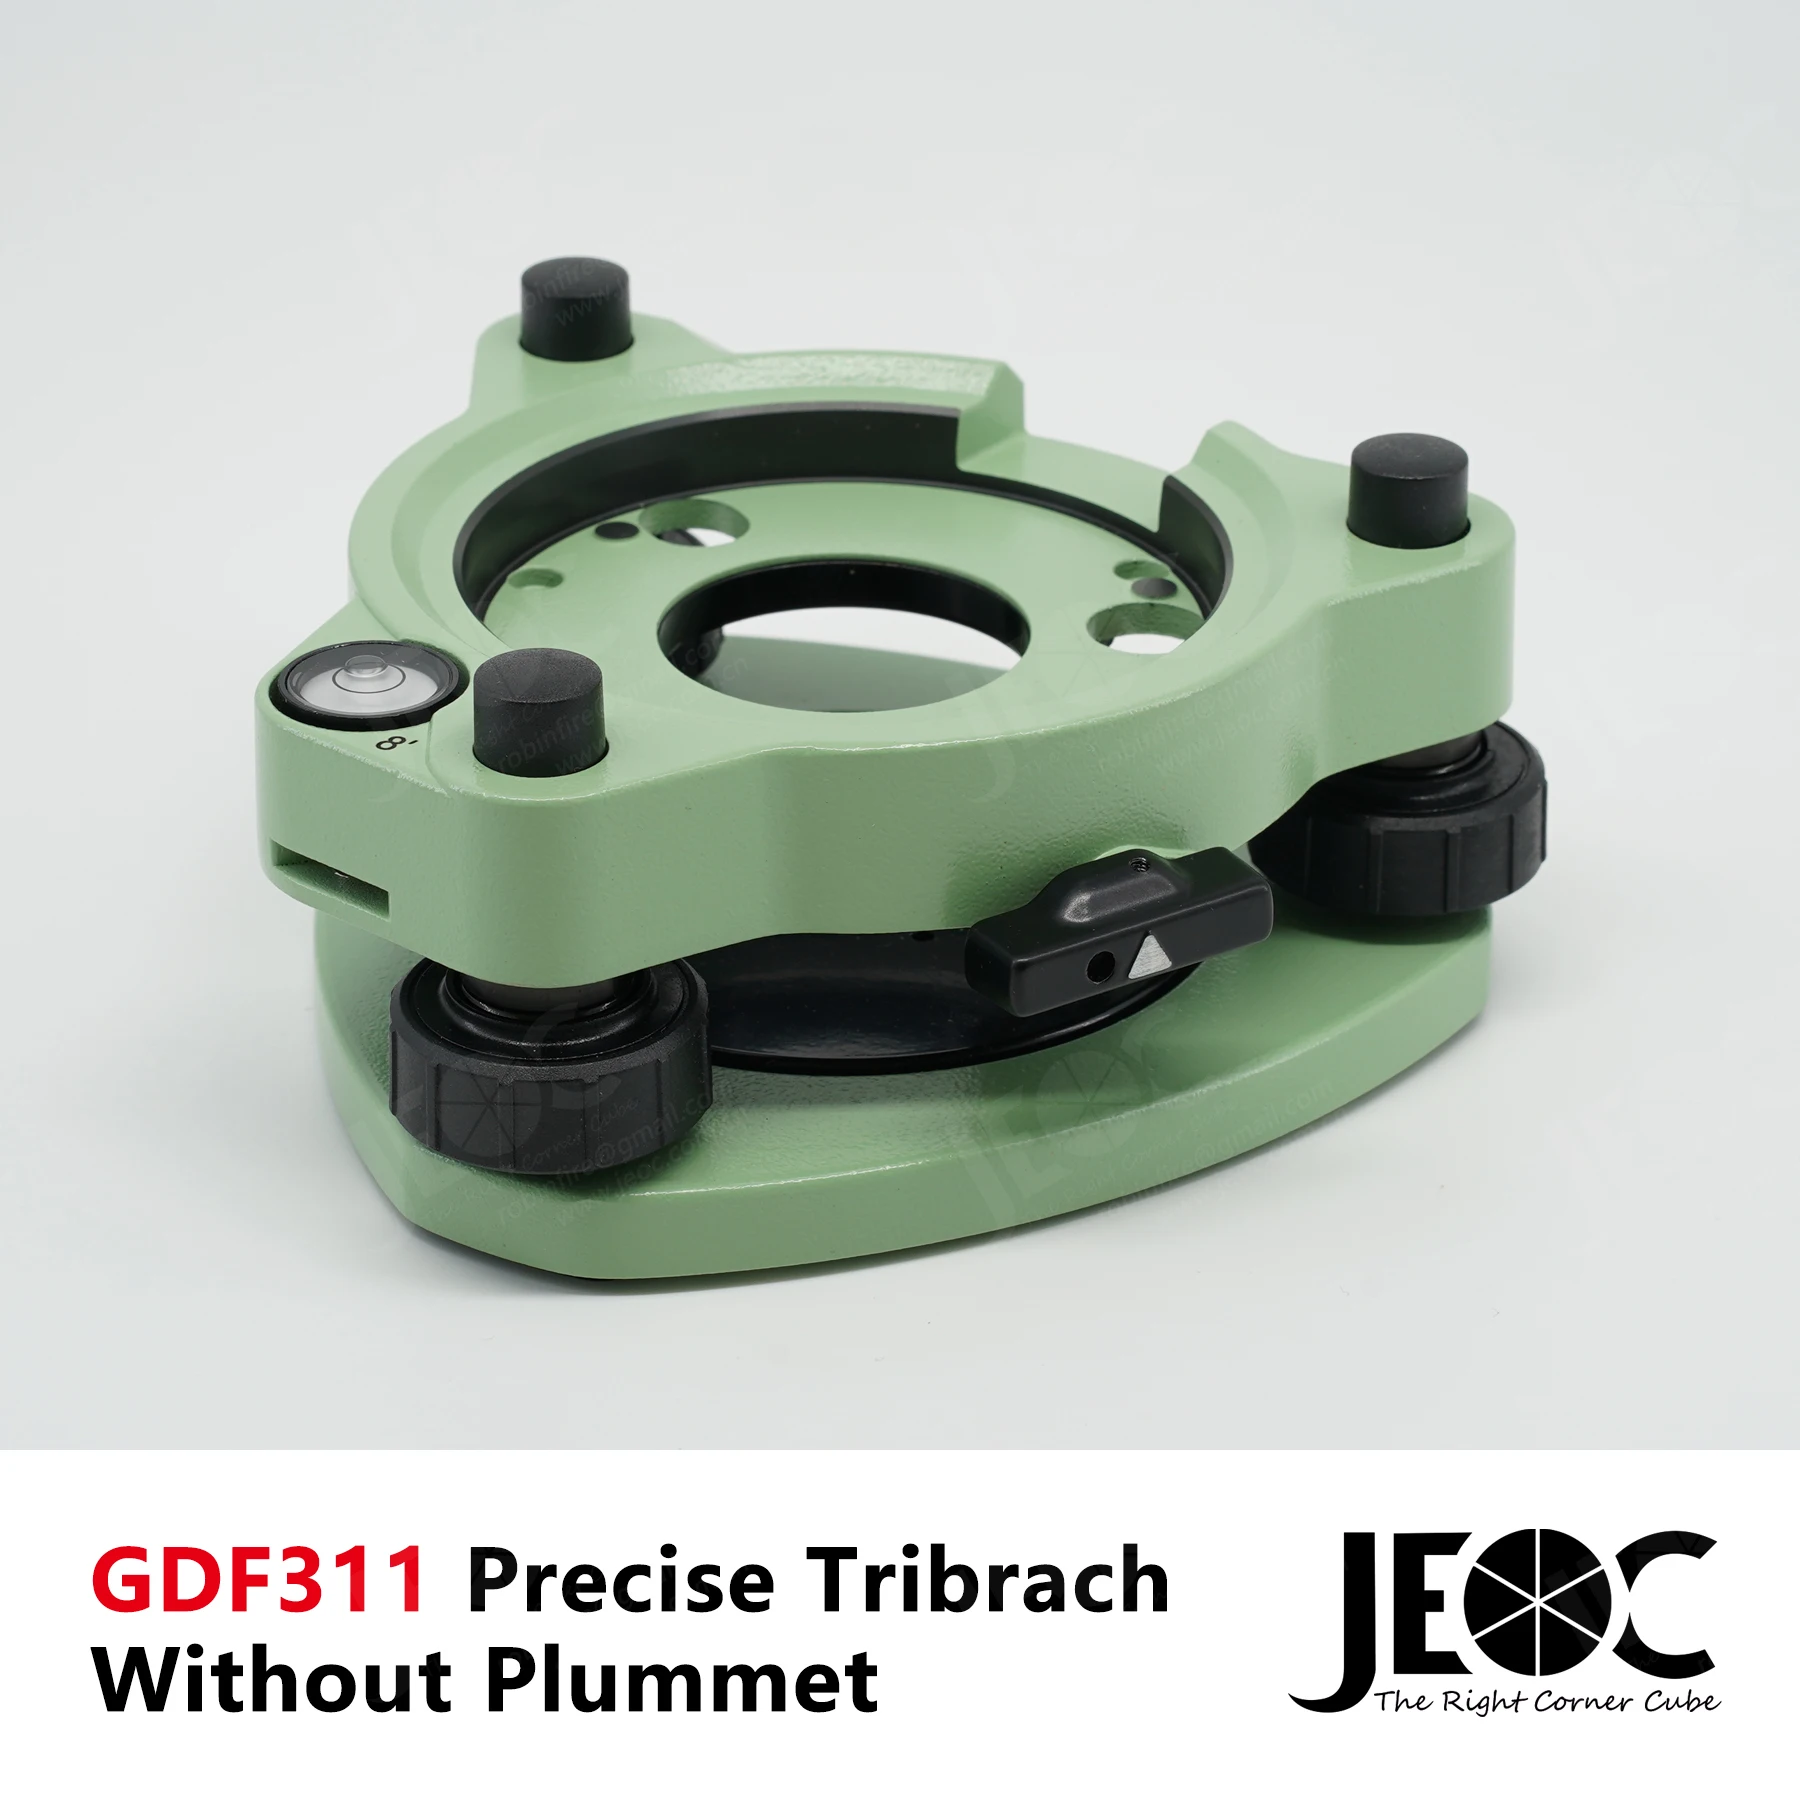 JEOC GDF311 High Accurate Tribrach for Leica Geosystems, Without Optical Plummet